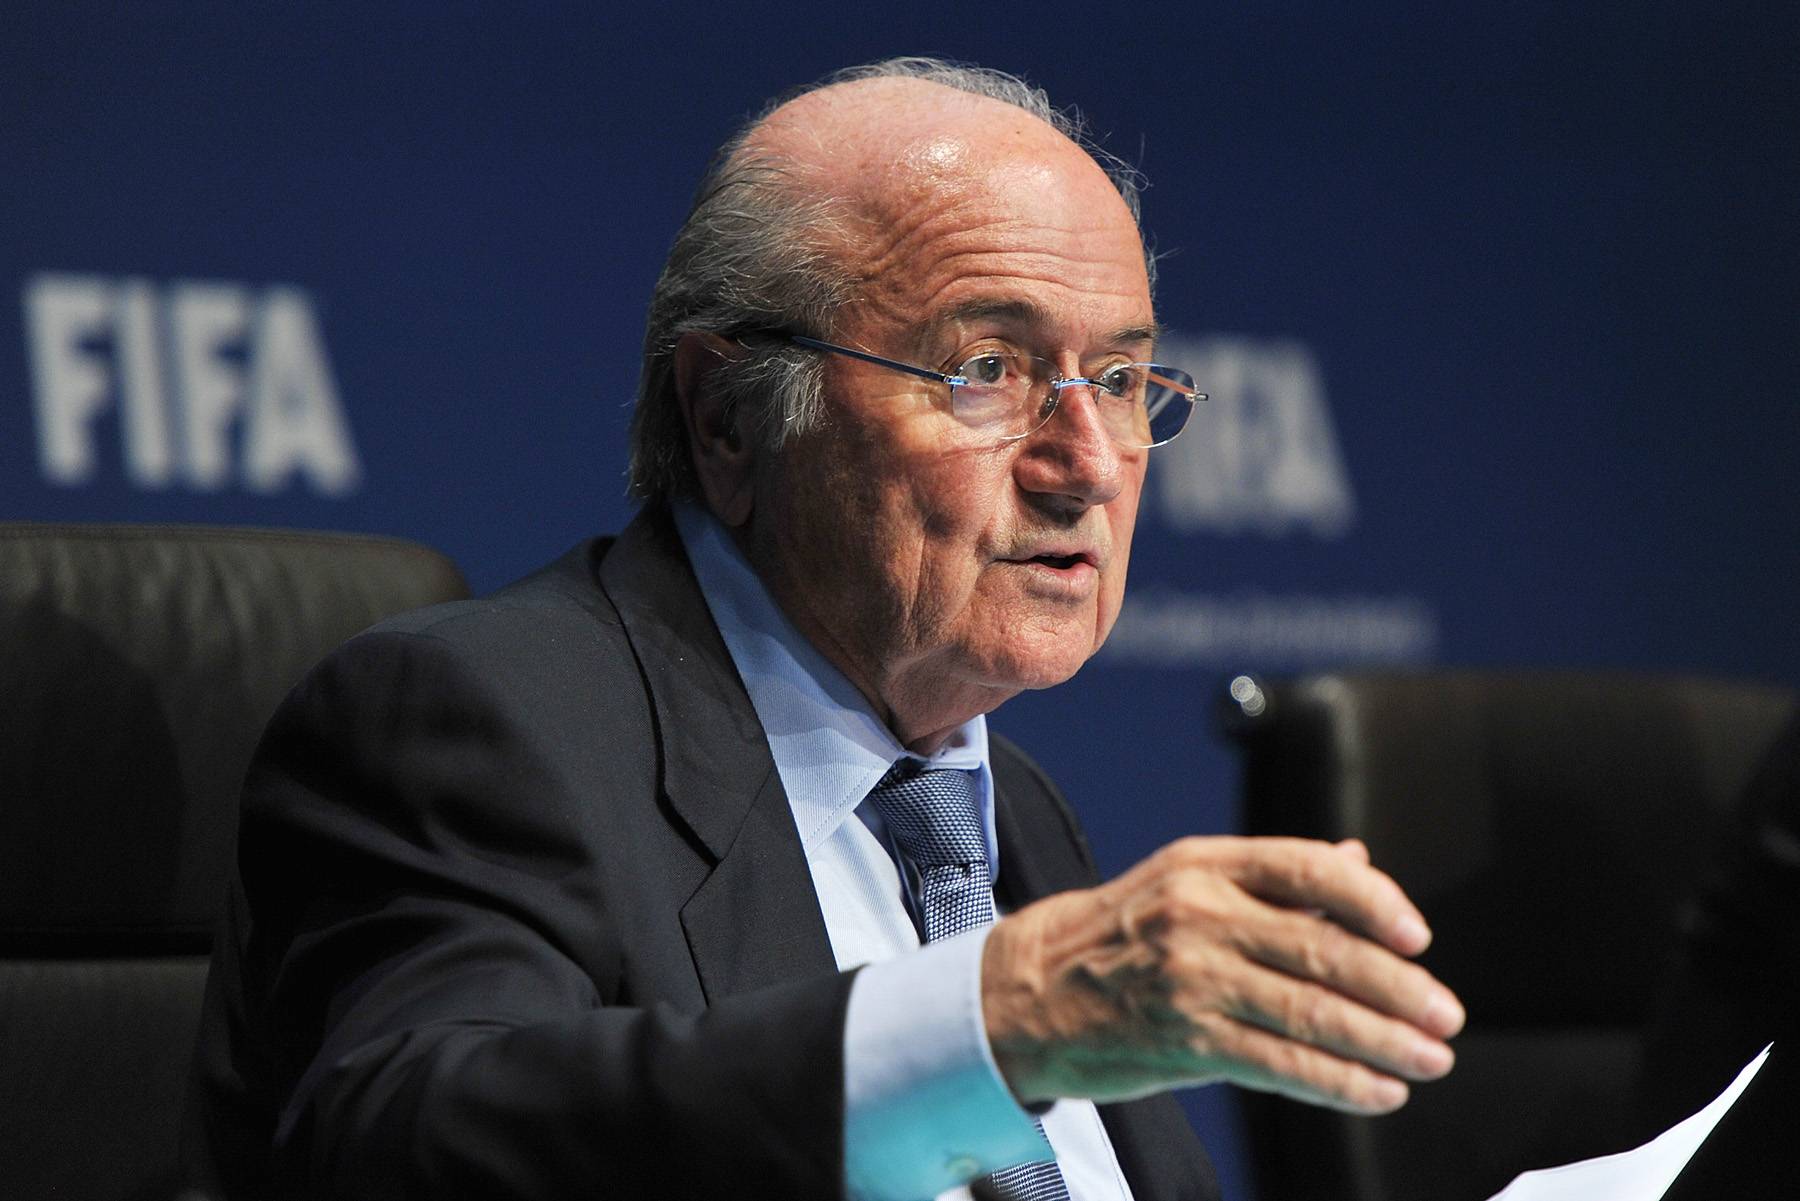 High-Level Denial - In November 2011, FIFA&nbsp;President&nbsp;Sepp Blatter proclaimed there are no racial issues in international soccer. Blatter added insult to injury by adding that players who believe they have experienced racism should remember “this is a game.”(Photo: Harold Cunningham/Getty Images)